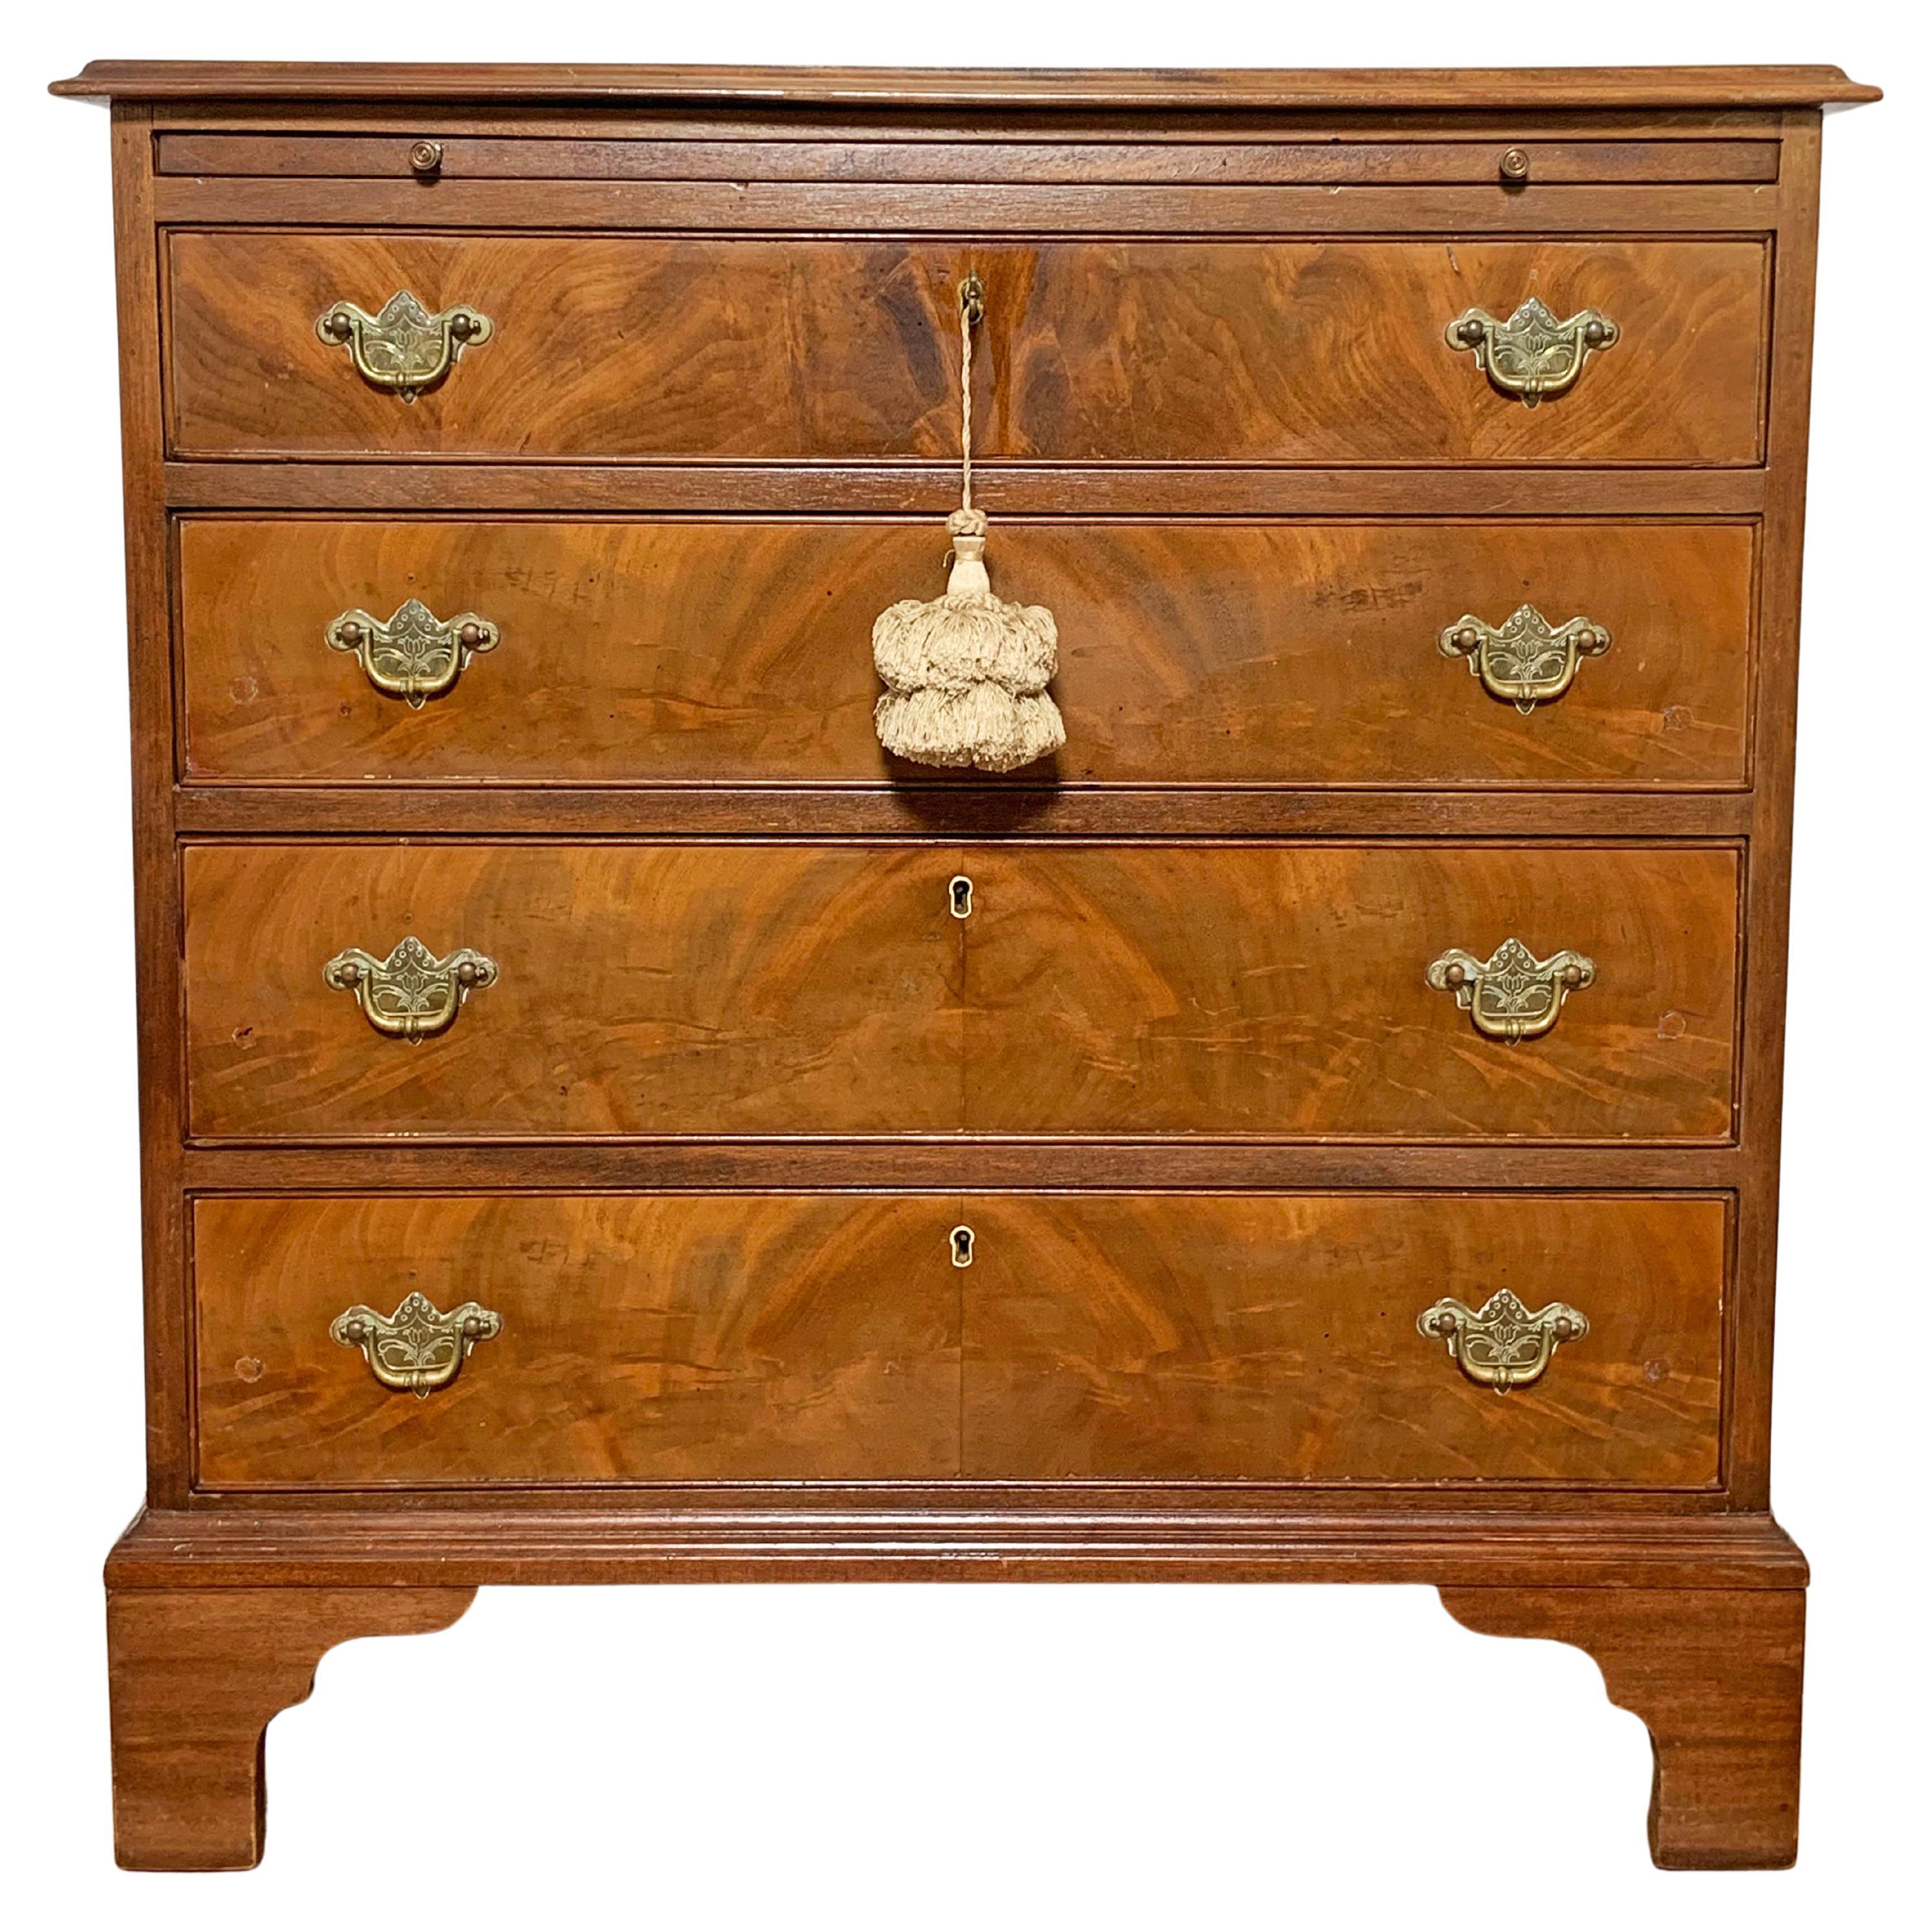 Antique English Chippendale Chest, Circa Late 18th Century